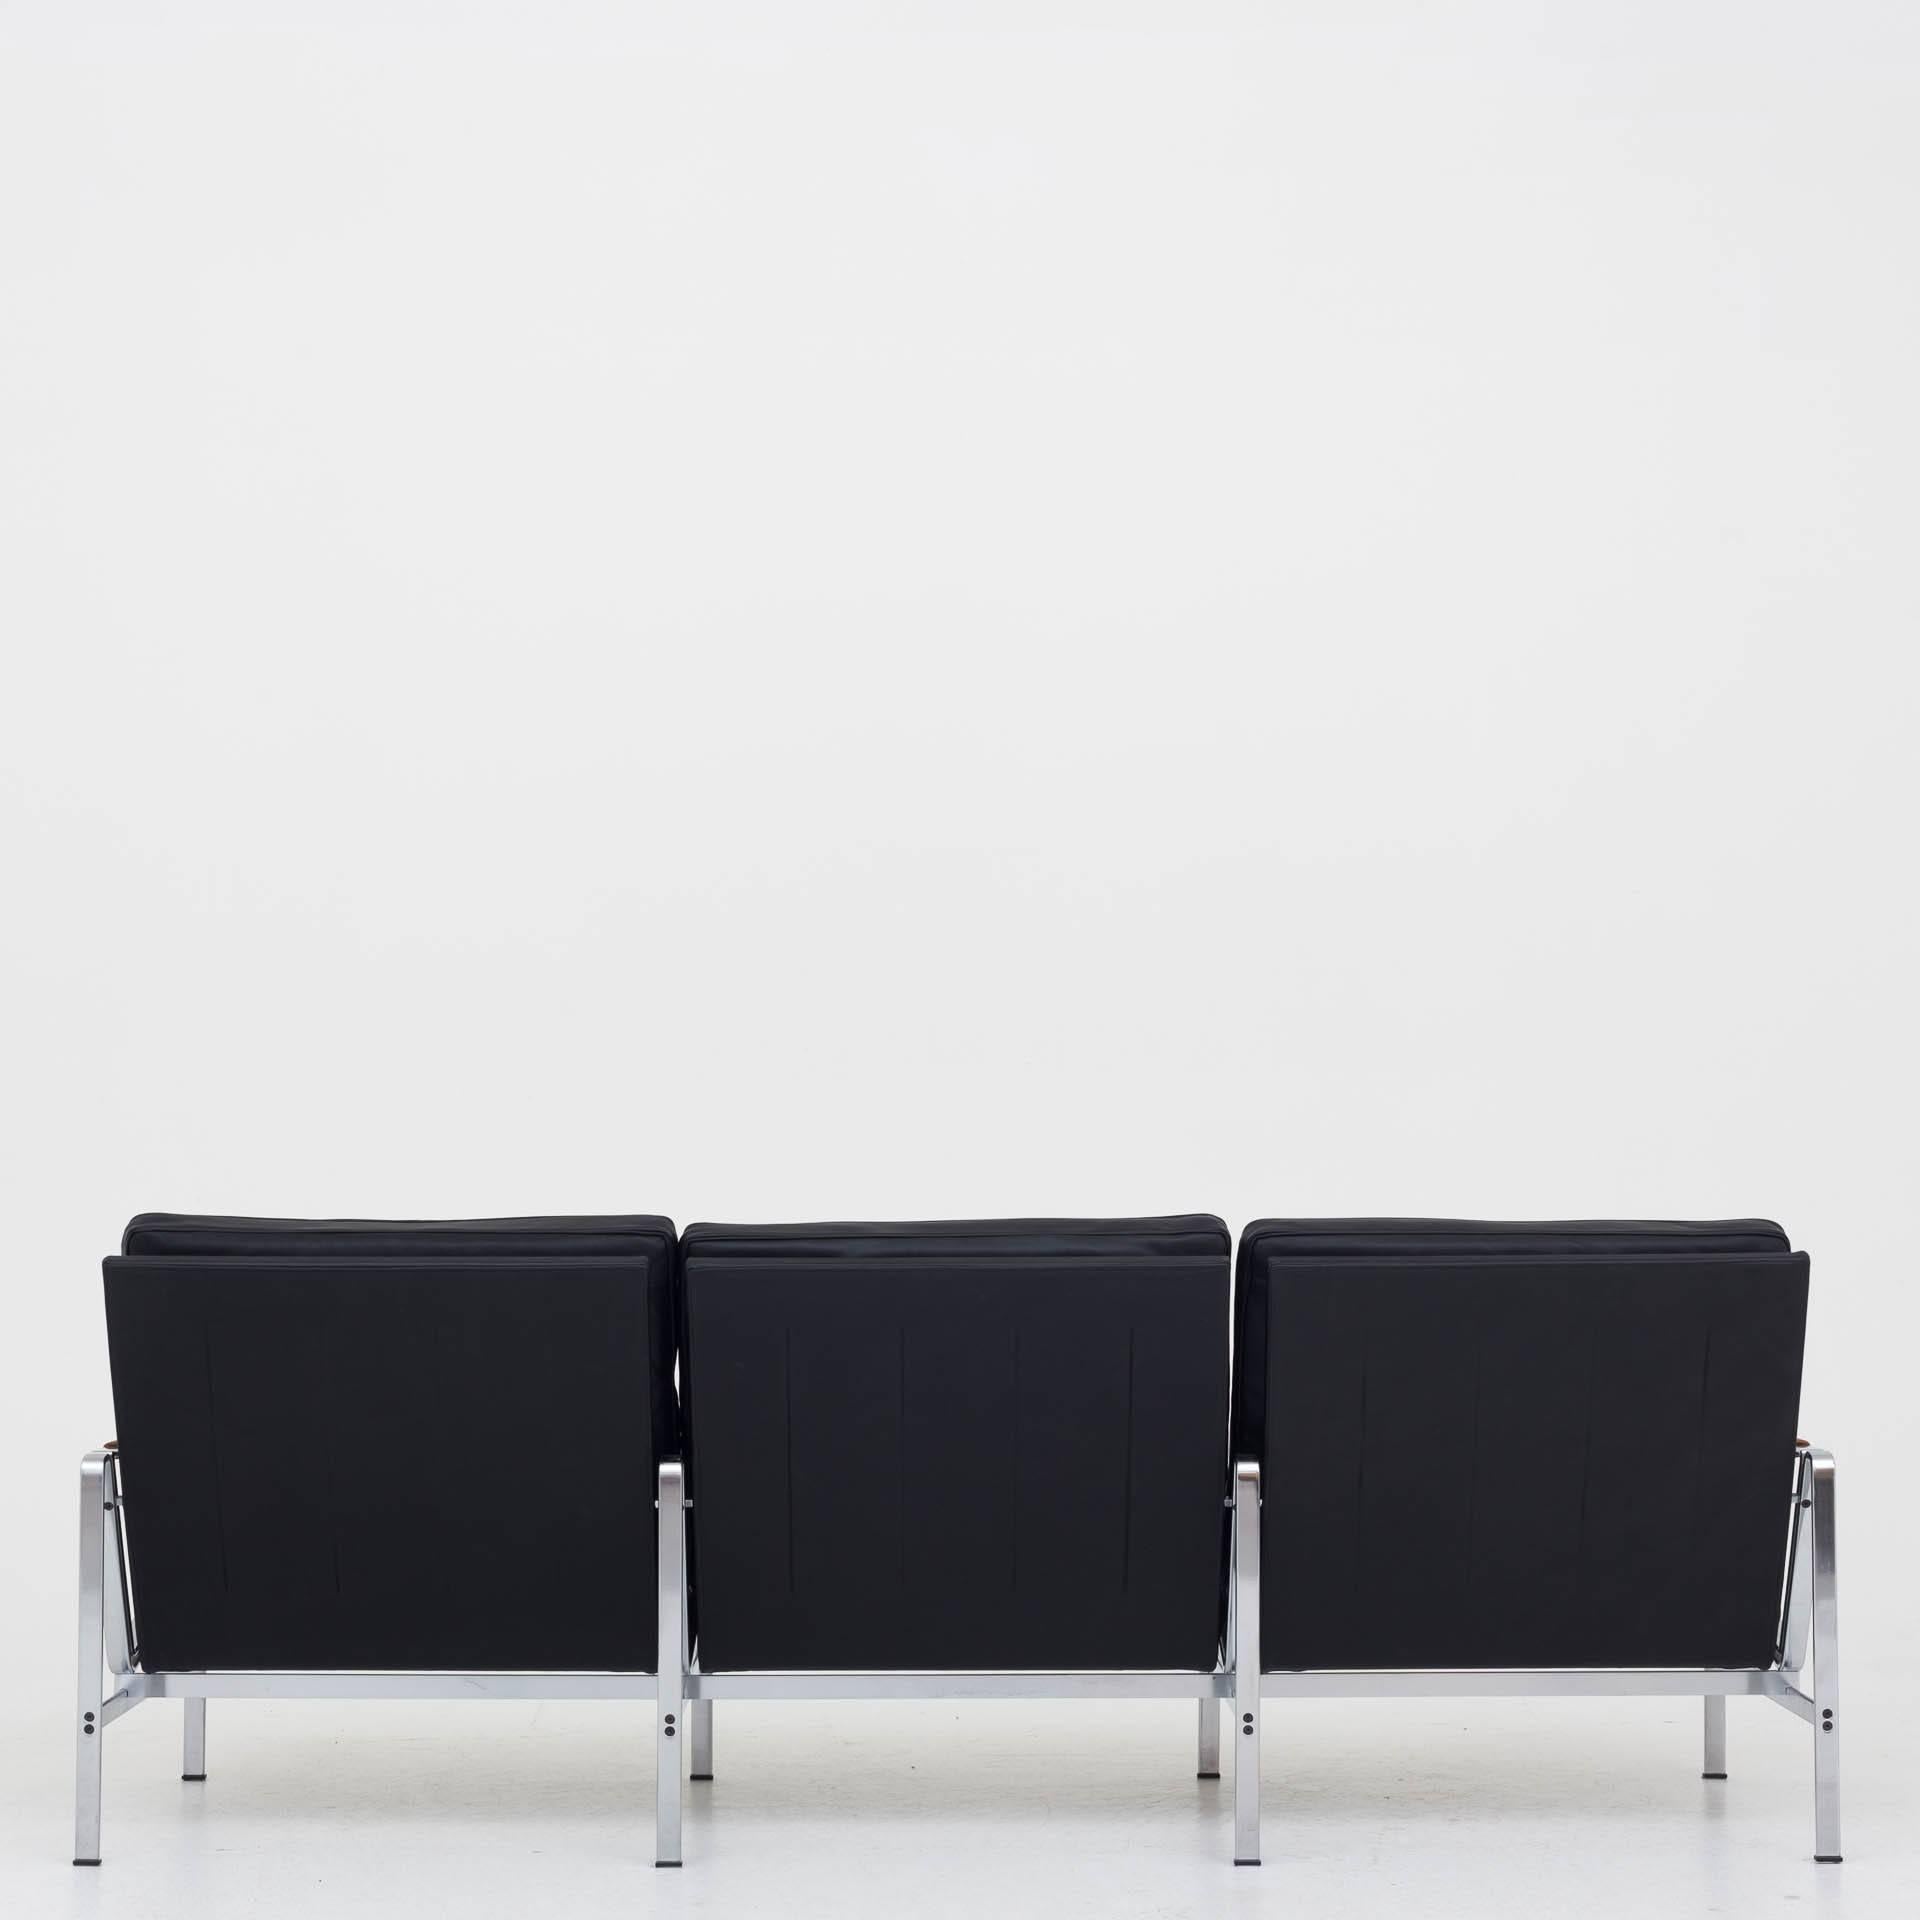 FK 6720, three-seat sofa in black leather and natural leather on armrests. Steel frame.